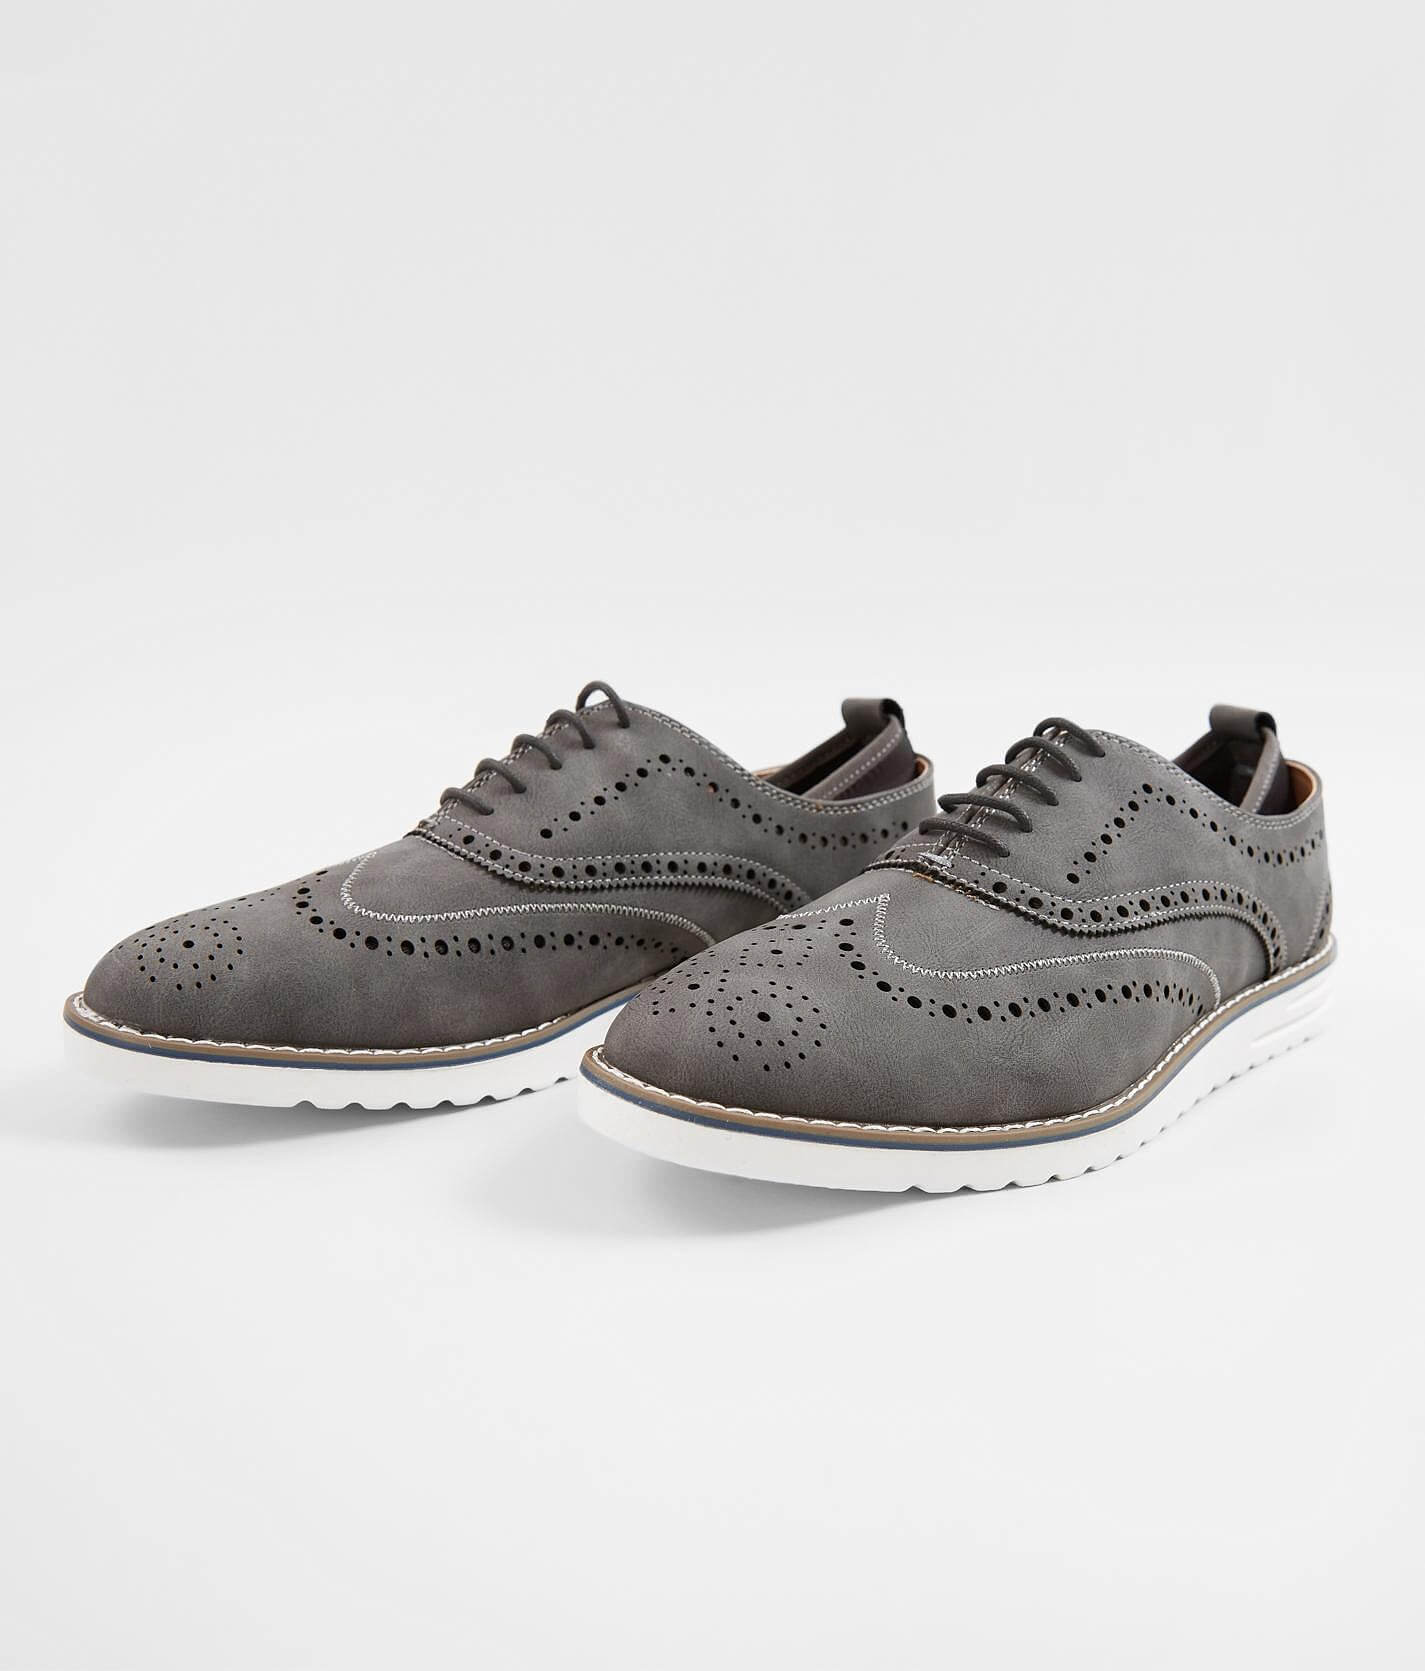 black and grey wingtip shoes